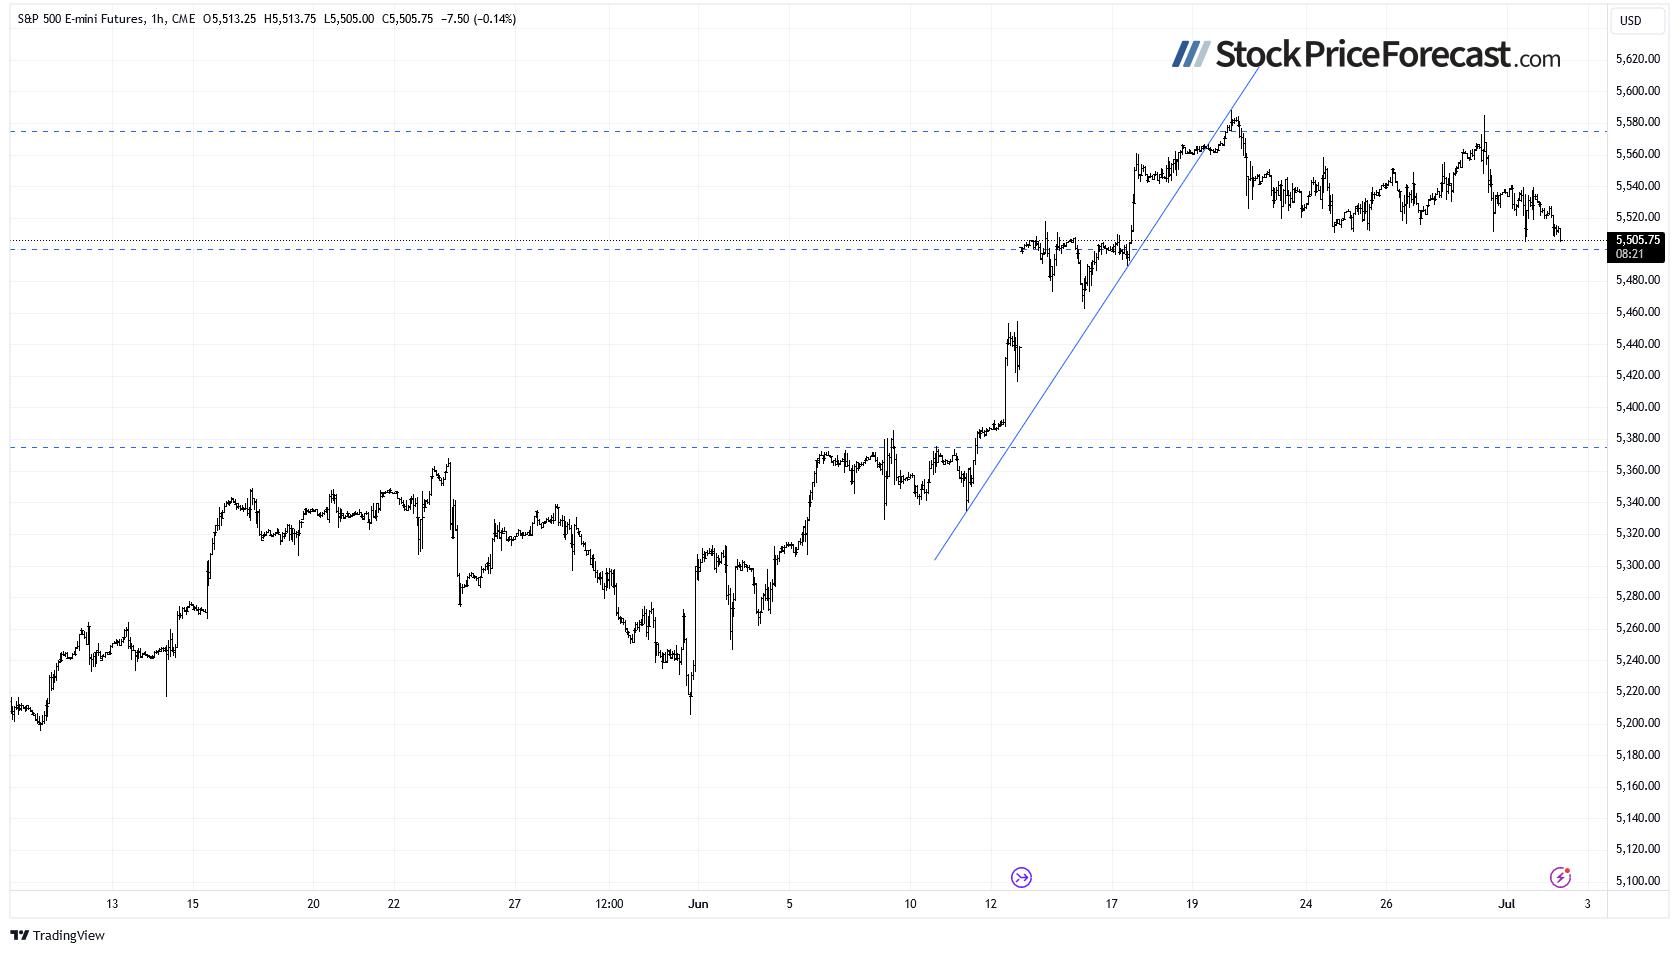 S&P 500 Futures Hourly Chart